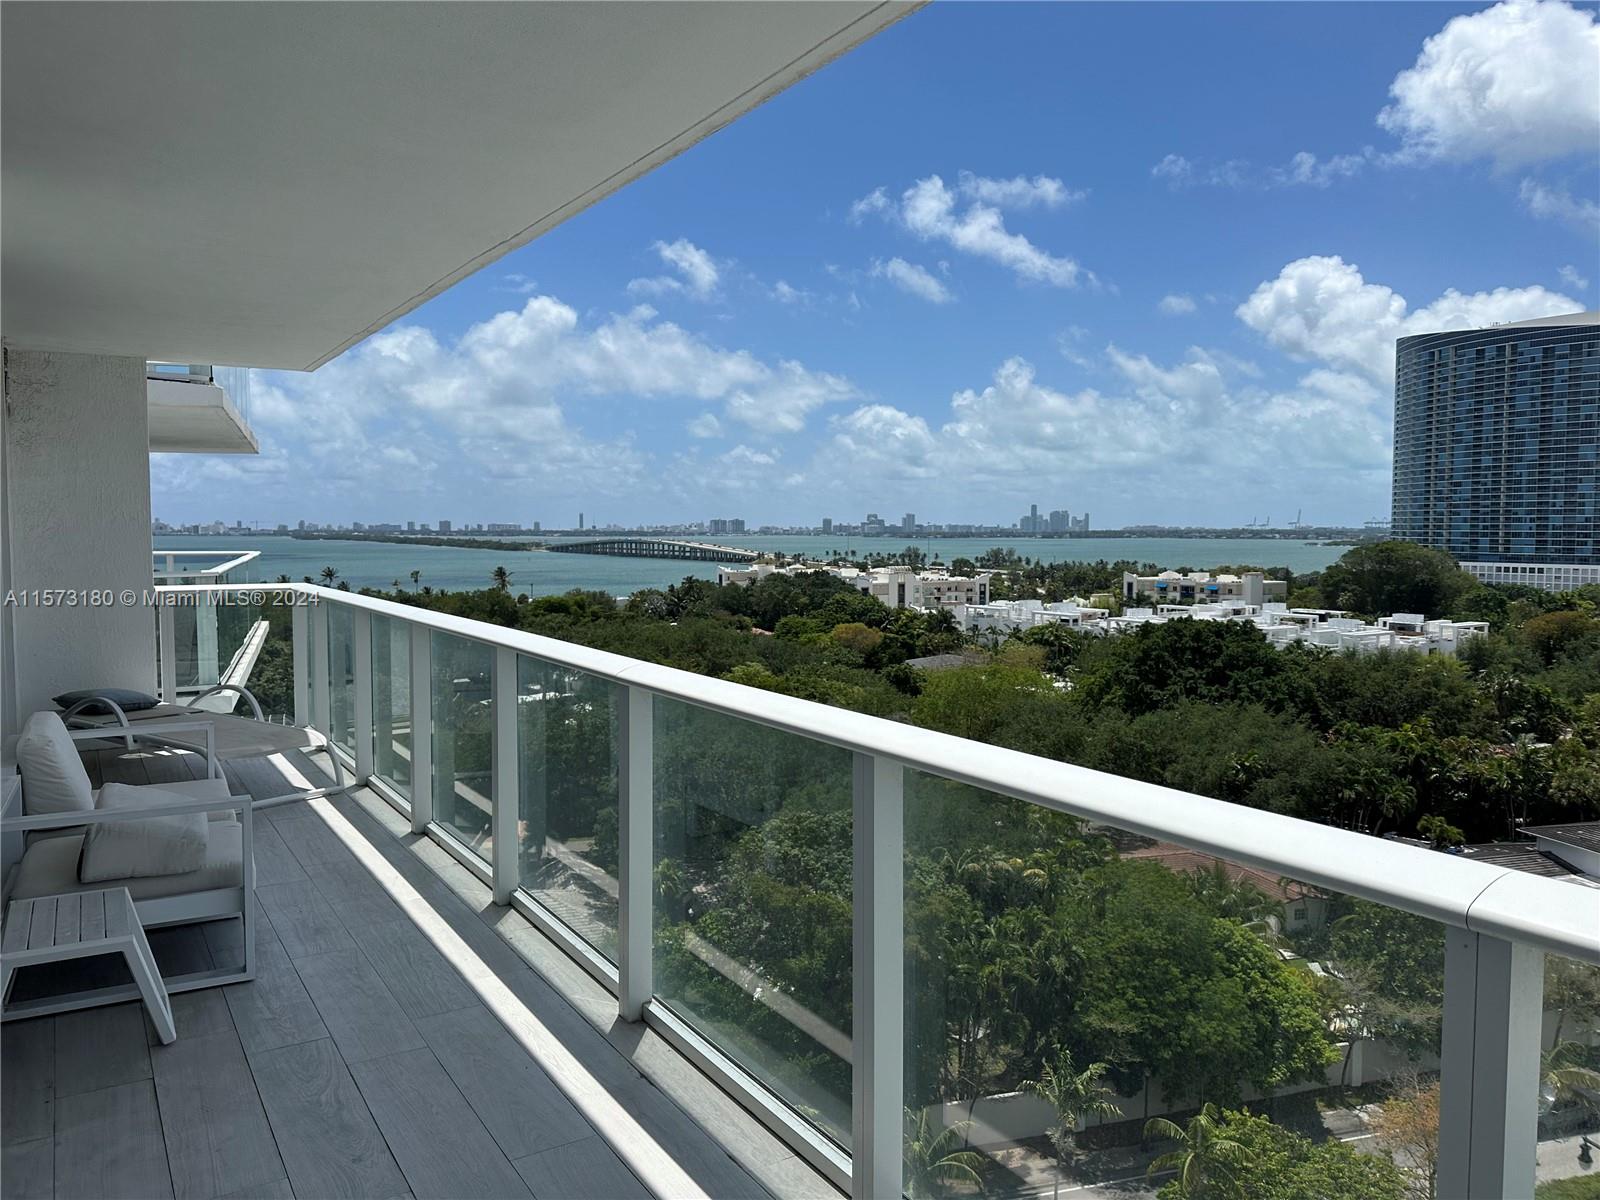 This exquisite unit boasts 2 bedrooms and 2 bathrooms, complemented by breathtaking views of the water. It features a large, naturally-lit living and dining area, and an open kitchen outfitted with premium stainless steel appliances. Each bedroom is equipped with solar screens and blackout shades for comfort. Conveniently located within walking distance to the Design District's shopping and dining options. The building is secured with impact-resistant glass and provides top-notch amenities like an advanced gym, a rooftop barbecue space, and a summer kitchen. Opportunity Price! Showings are easily arranged.